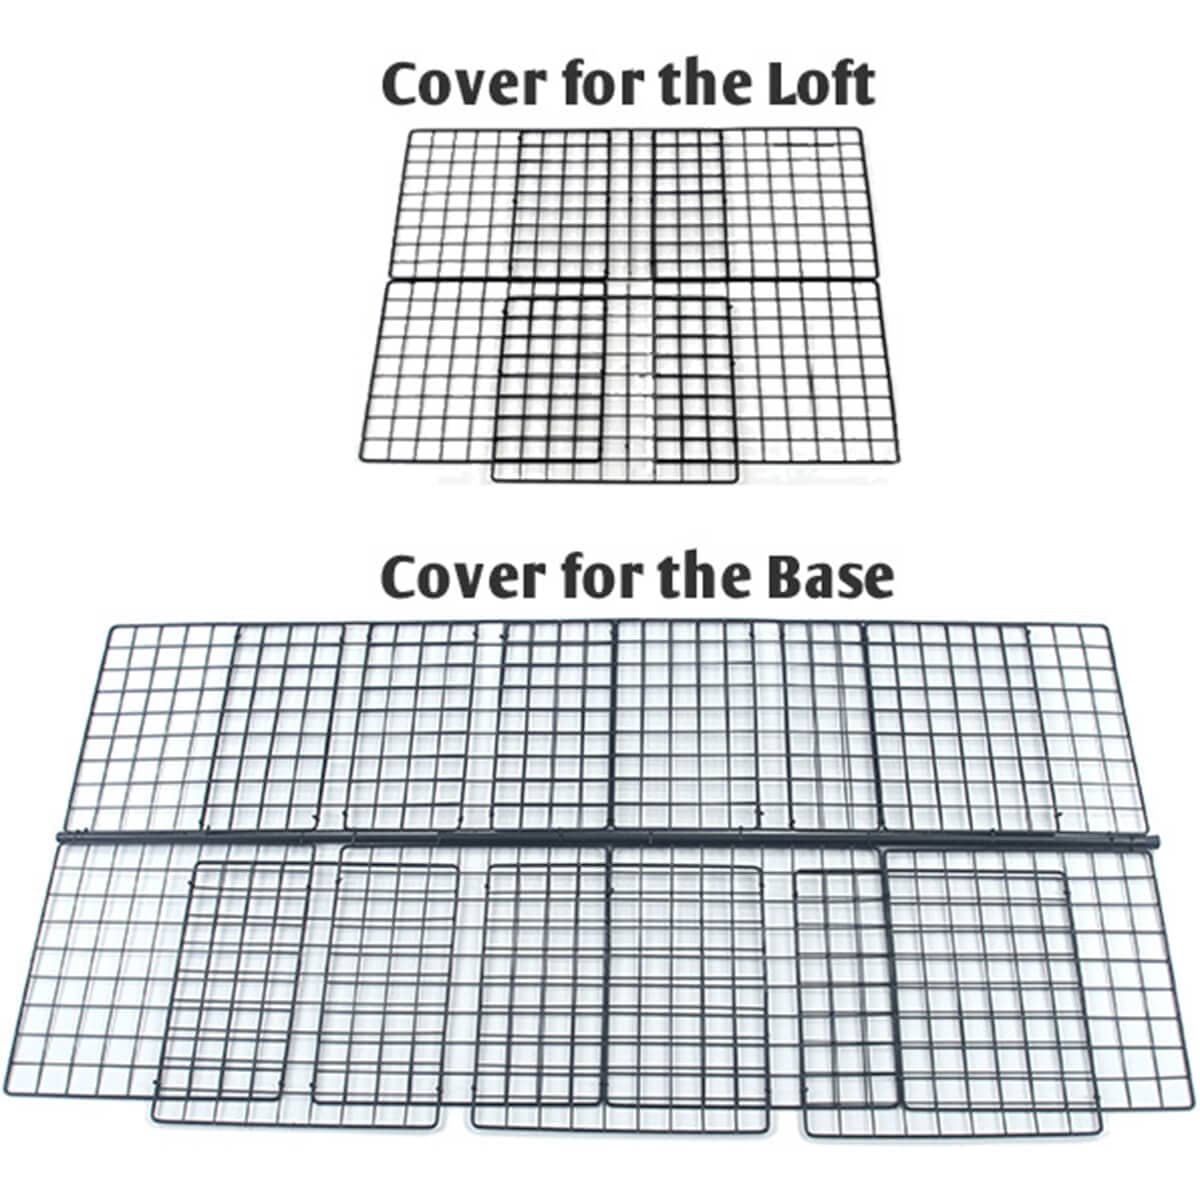 How to lay your grids out for a Jumbo/wide covered C&C guinea pig cage